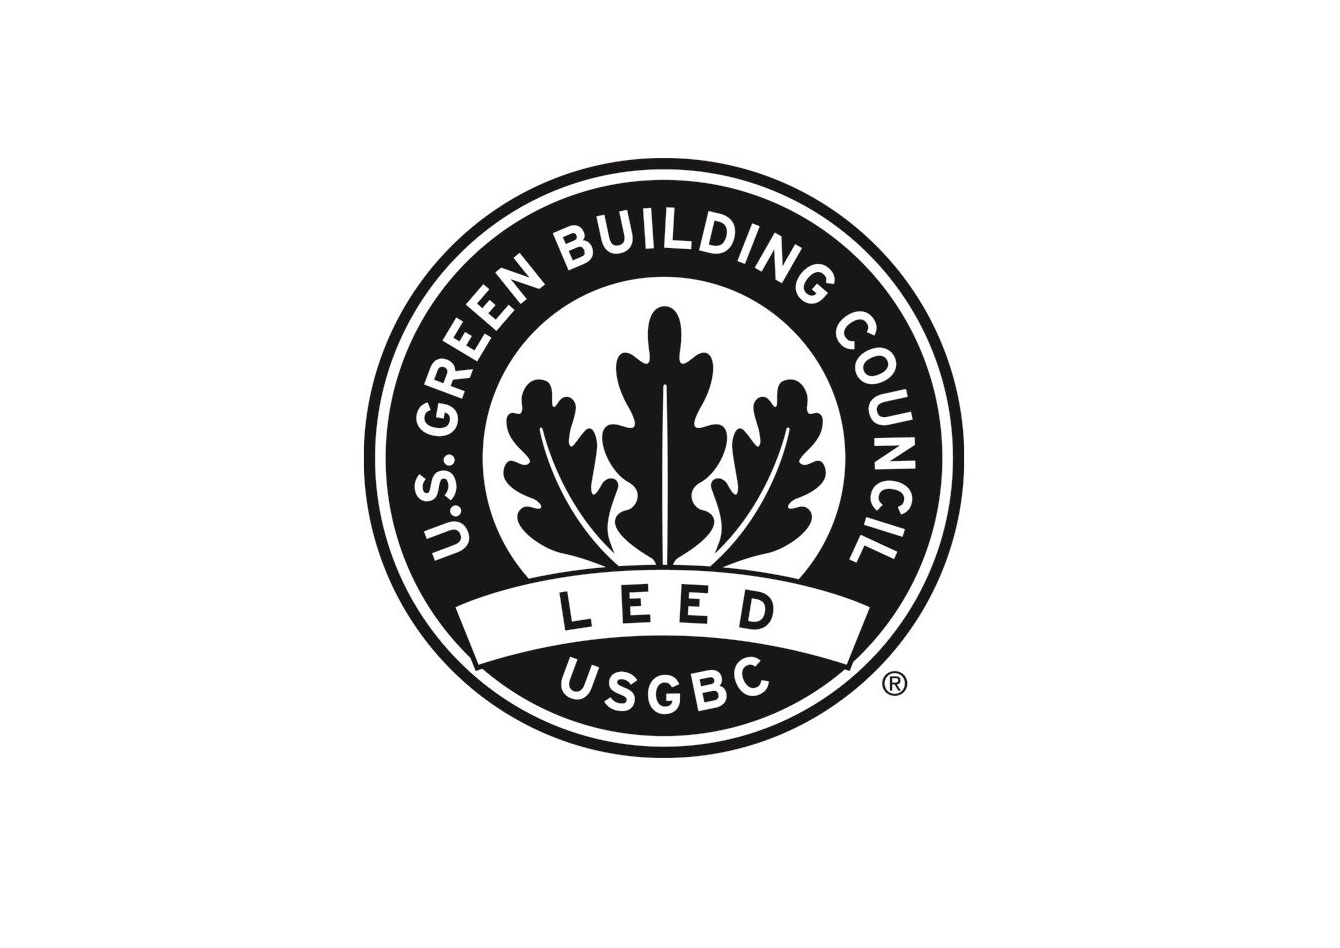 LEED_Zertifizierung_USGBC_Leadership_in_Energy_and_Environmental_Design_v2